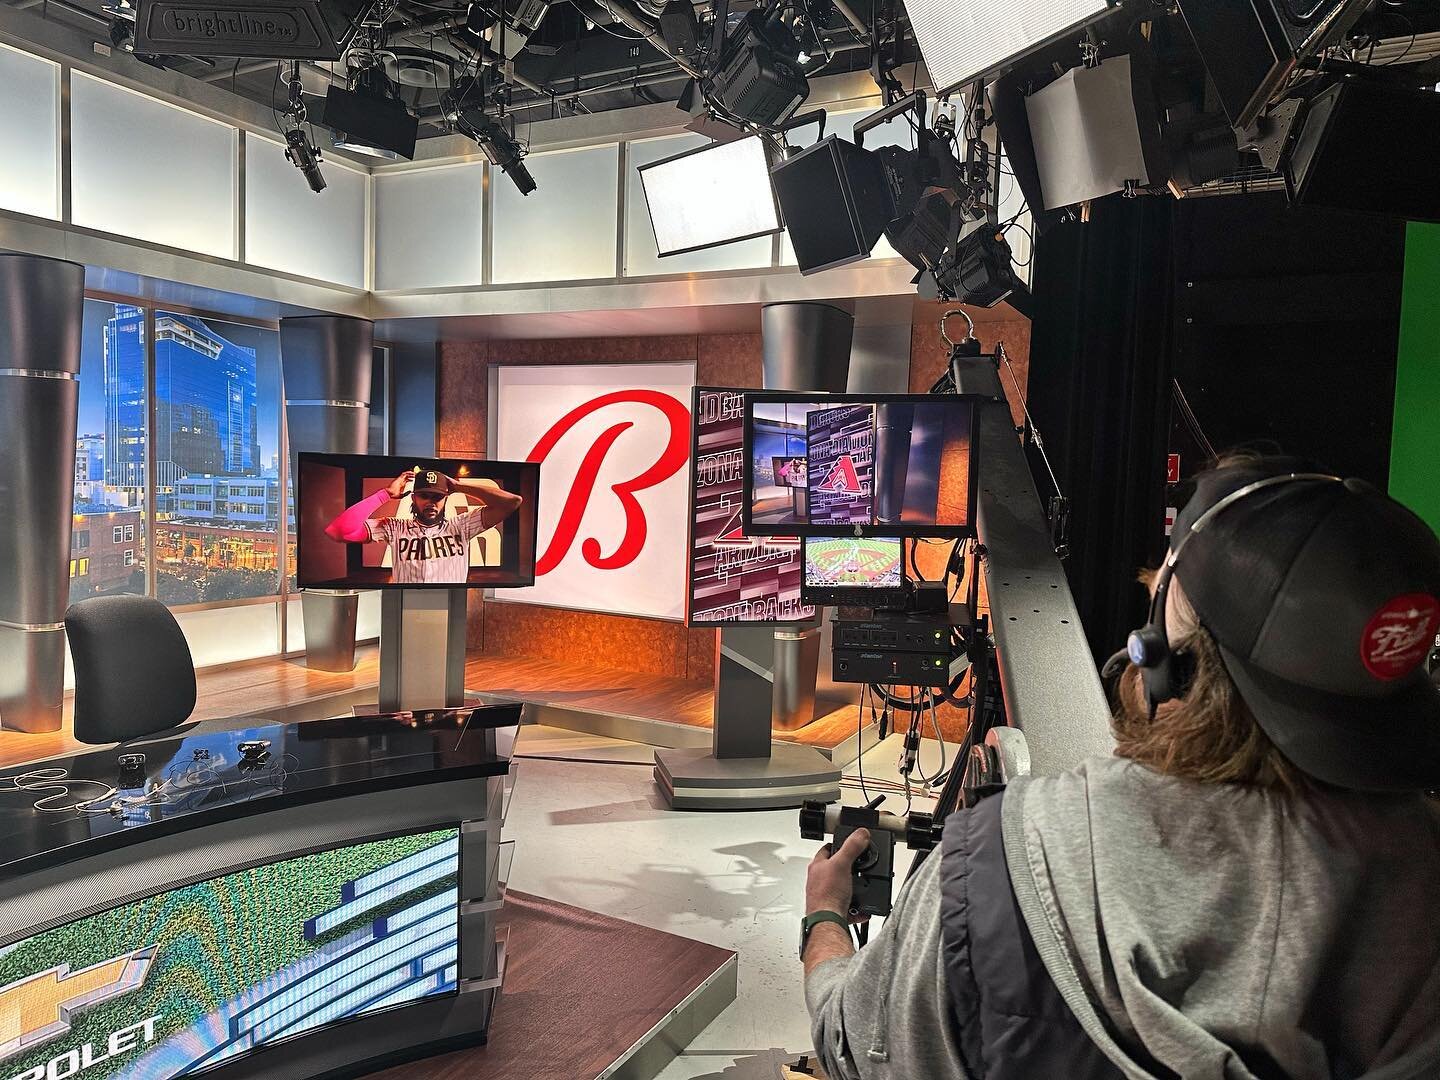 Our studio crew is working hard on tonight&rsquo;s #PadresLive pre and postgame shows on @ballysportssd! Tune in before and after the game. It&rsquo;s a big night for the @padres with @fernando_tatis21 back at it! Will you be watching? 

#padres #stu